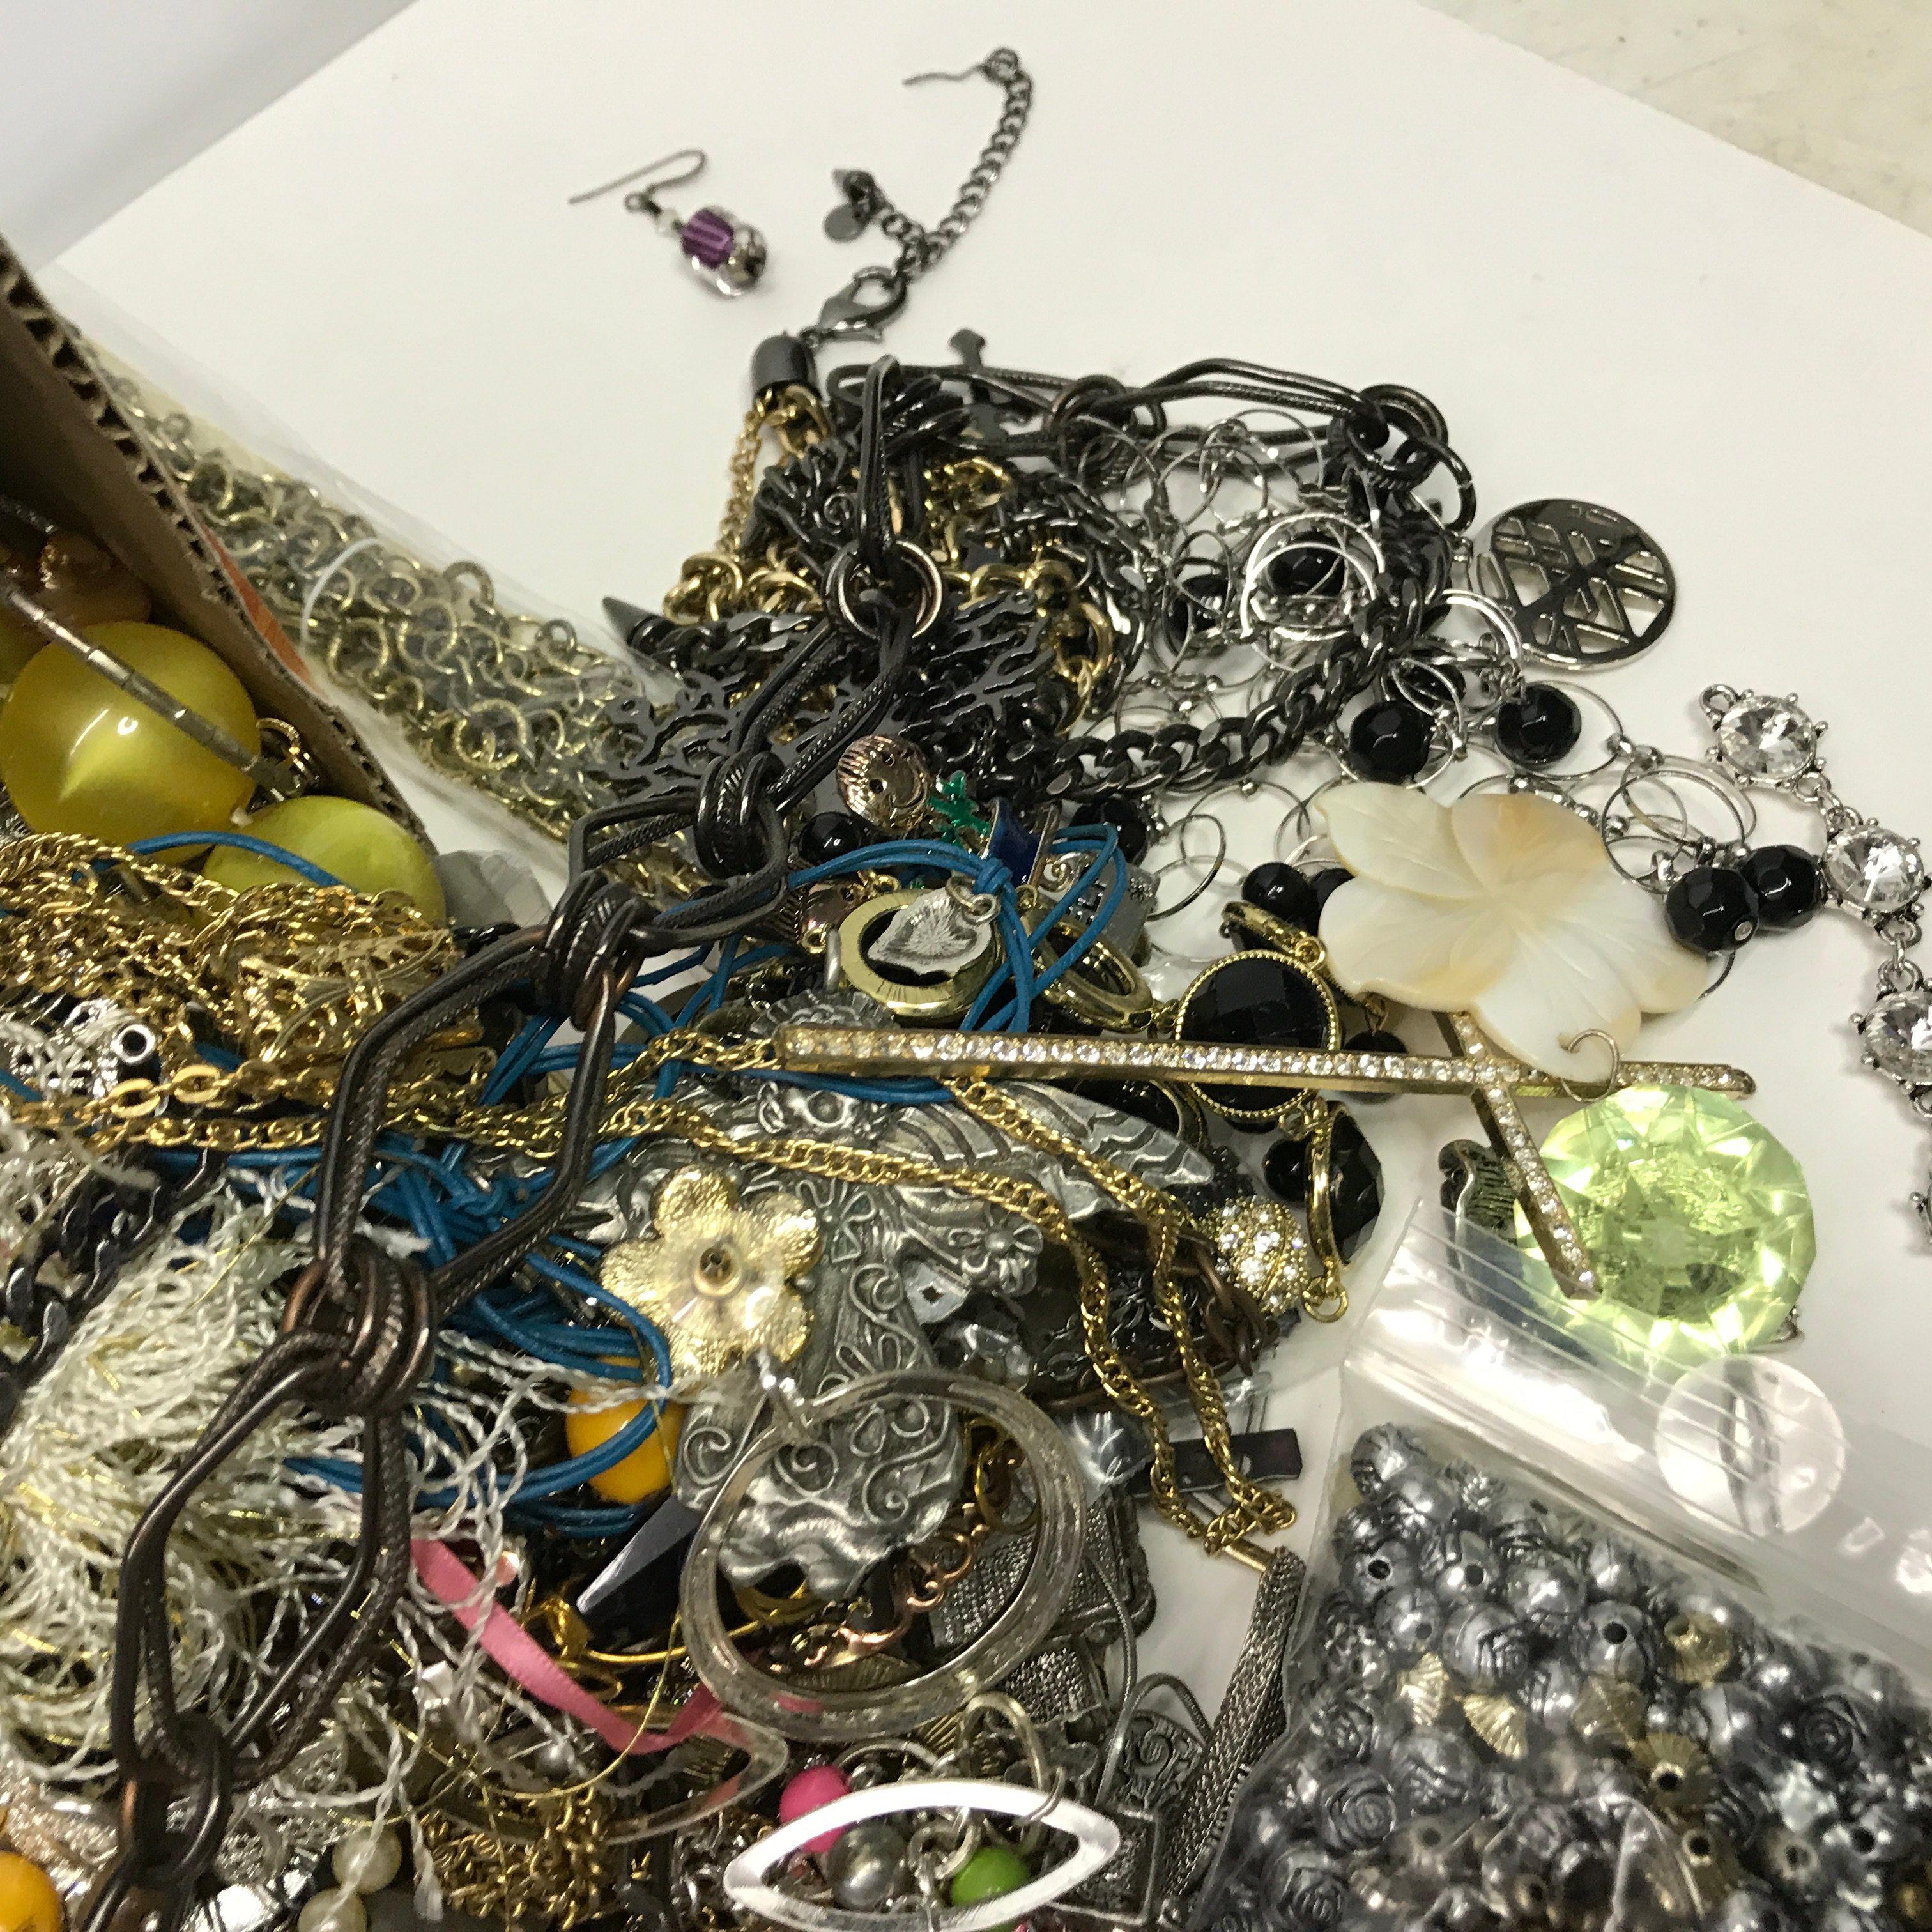 HUGE Lot of Misc Jewelry & Jewelry Parts & Pieces-Some For Wearing Some for Crafts & Jewelry Making